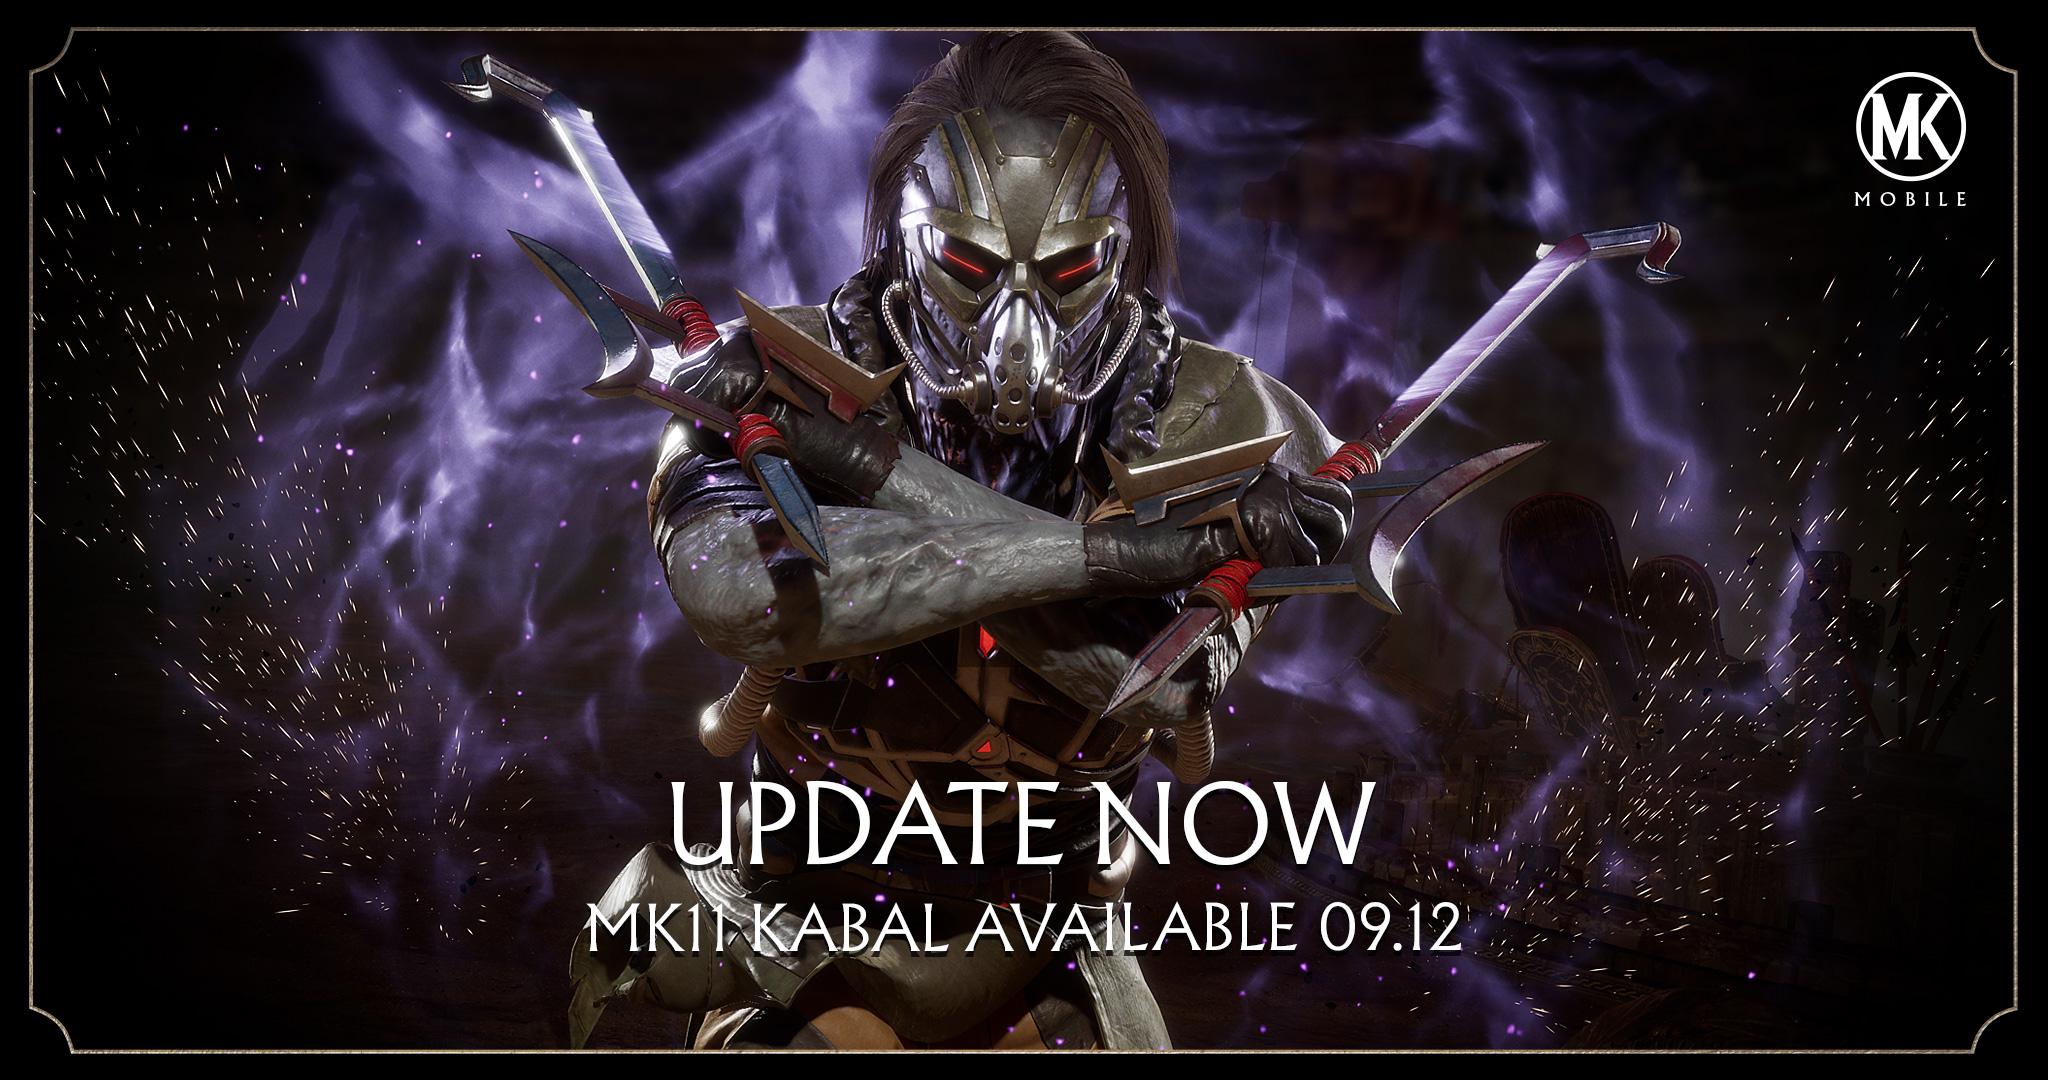 Mortal Kombat Mobile 2.2 is here and #MK11 KABAL is coming on September 12! Get the update now to play the new MK11 Jade and Dark Raiden Elder Challenges! #